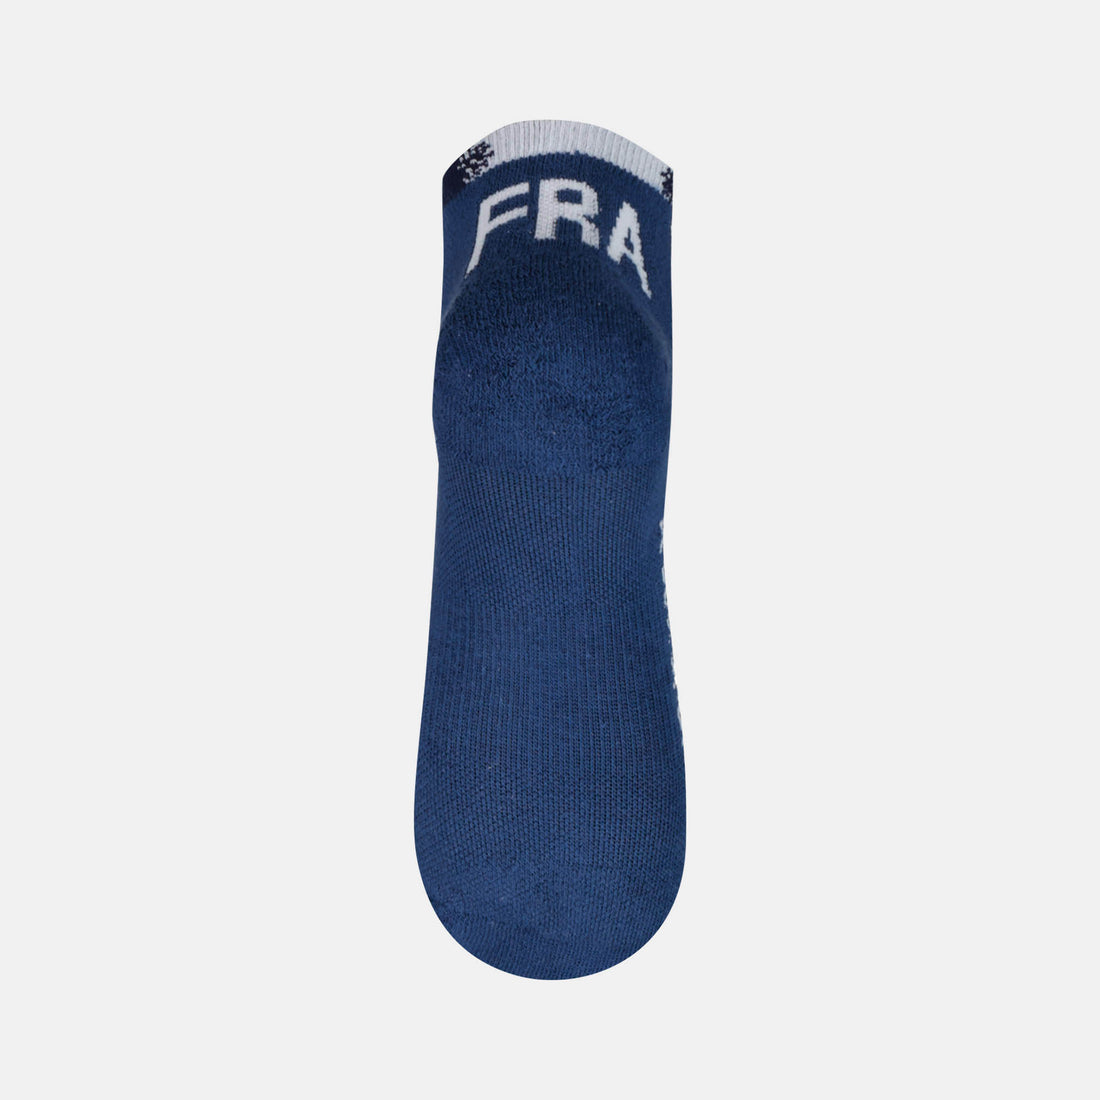 2410112-O TRAINING Chaussettes Basse N°1 insigni  | Calcetines Unisex